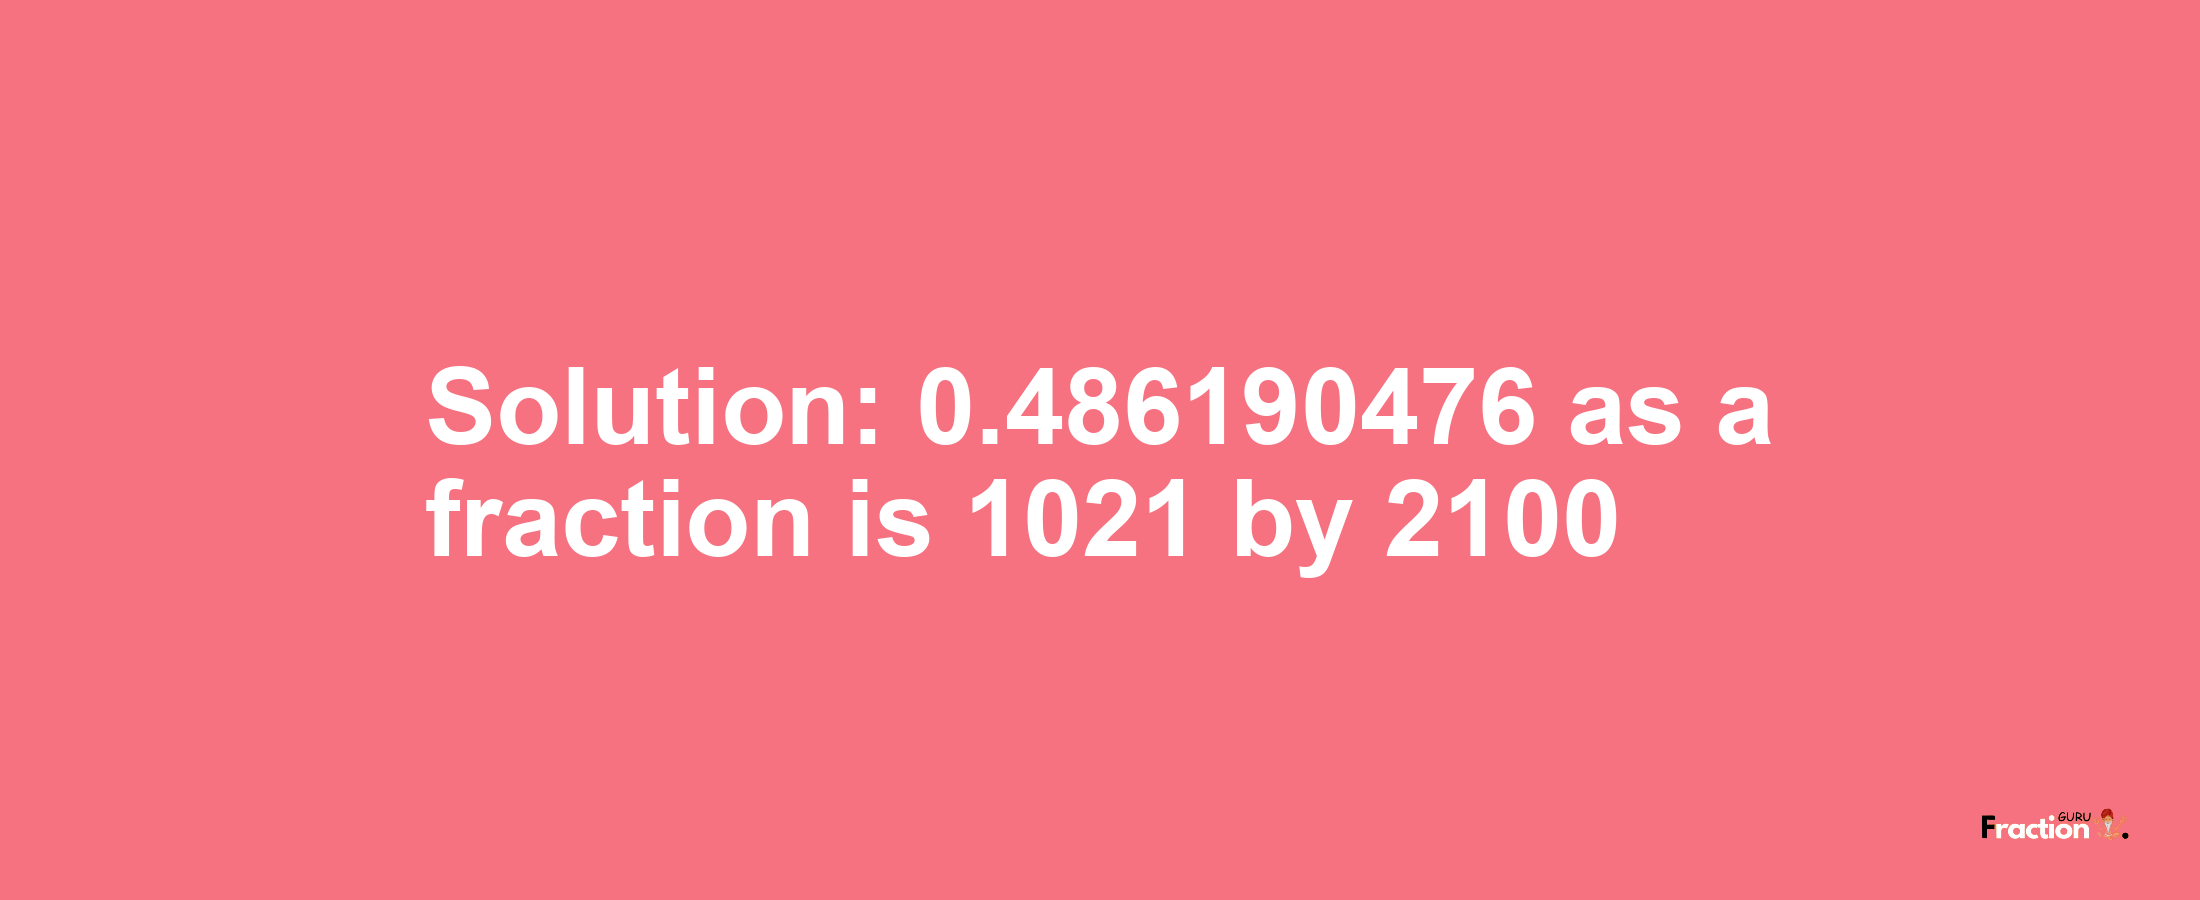 Solution:0.486190476 as a fraction is 1021/2100